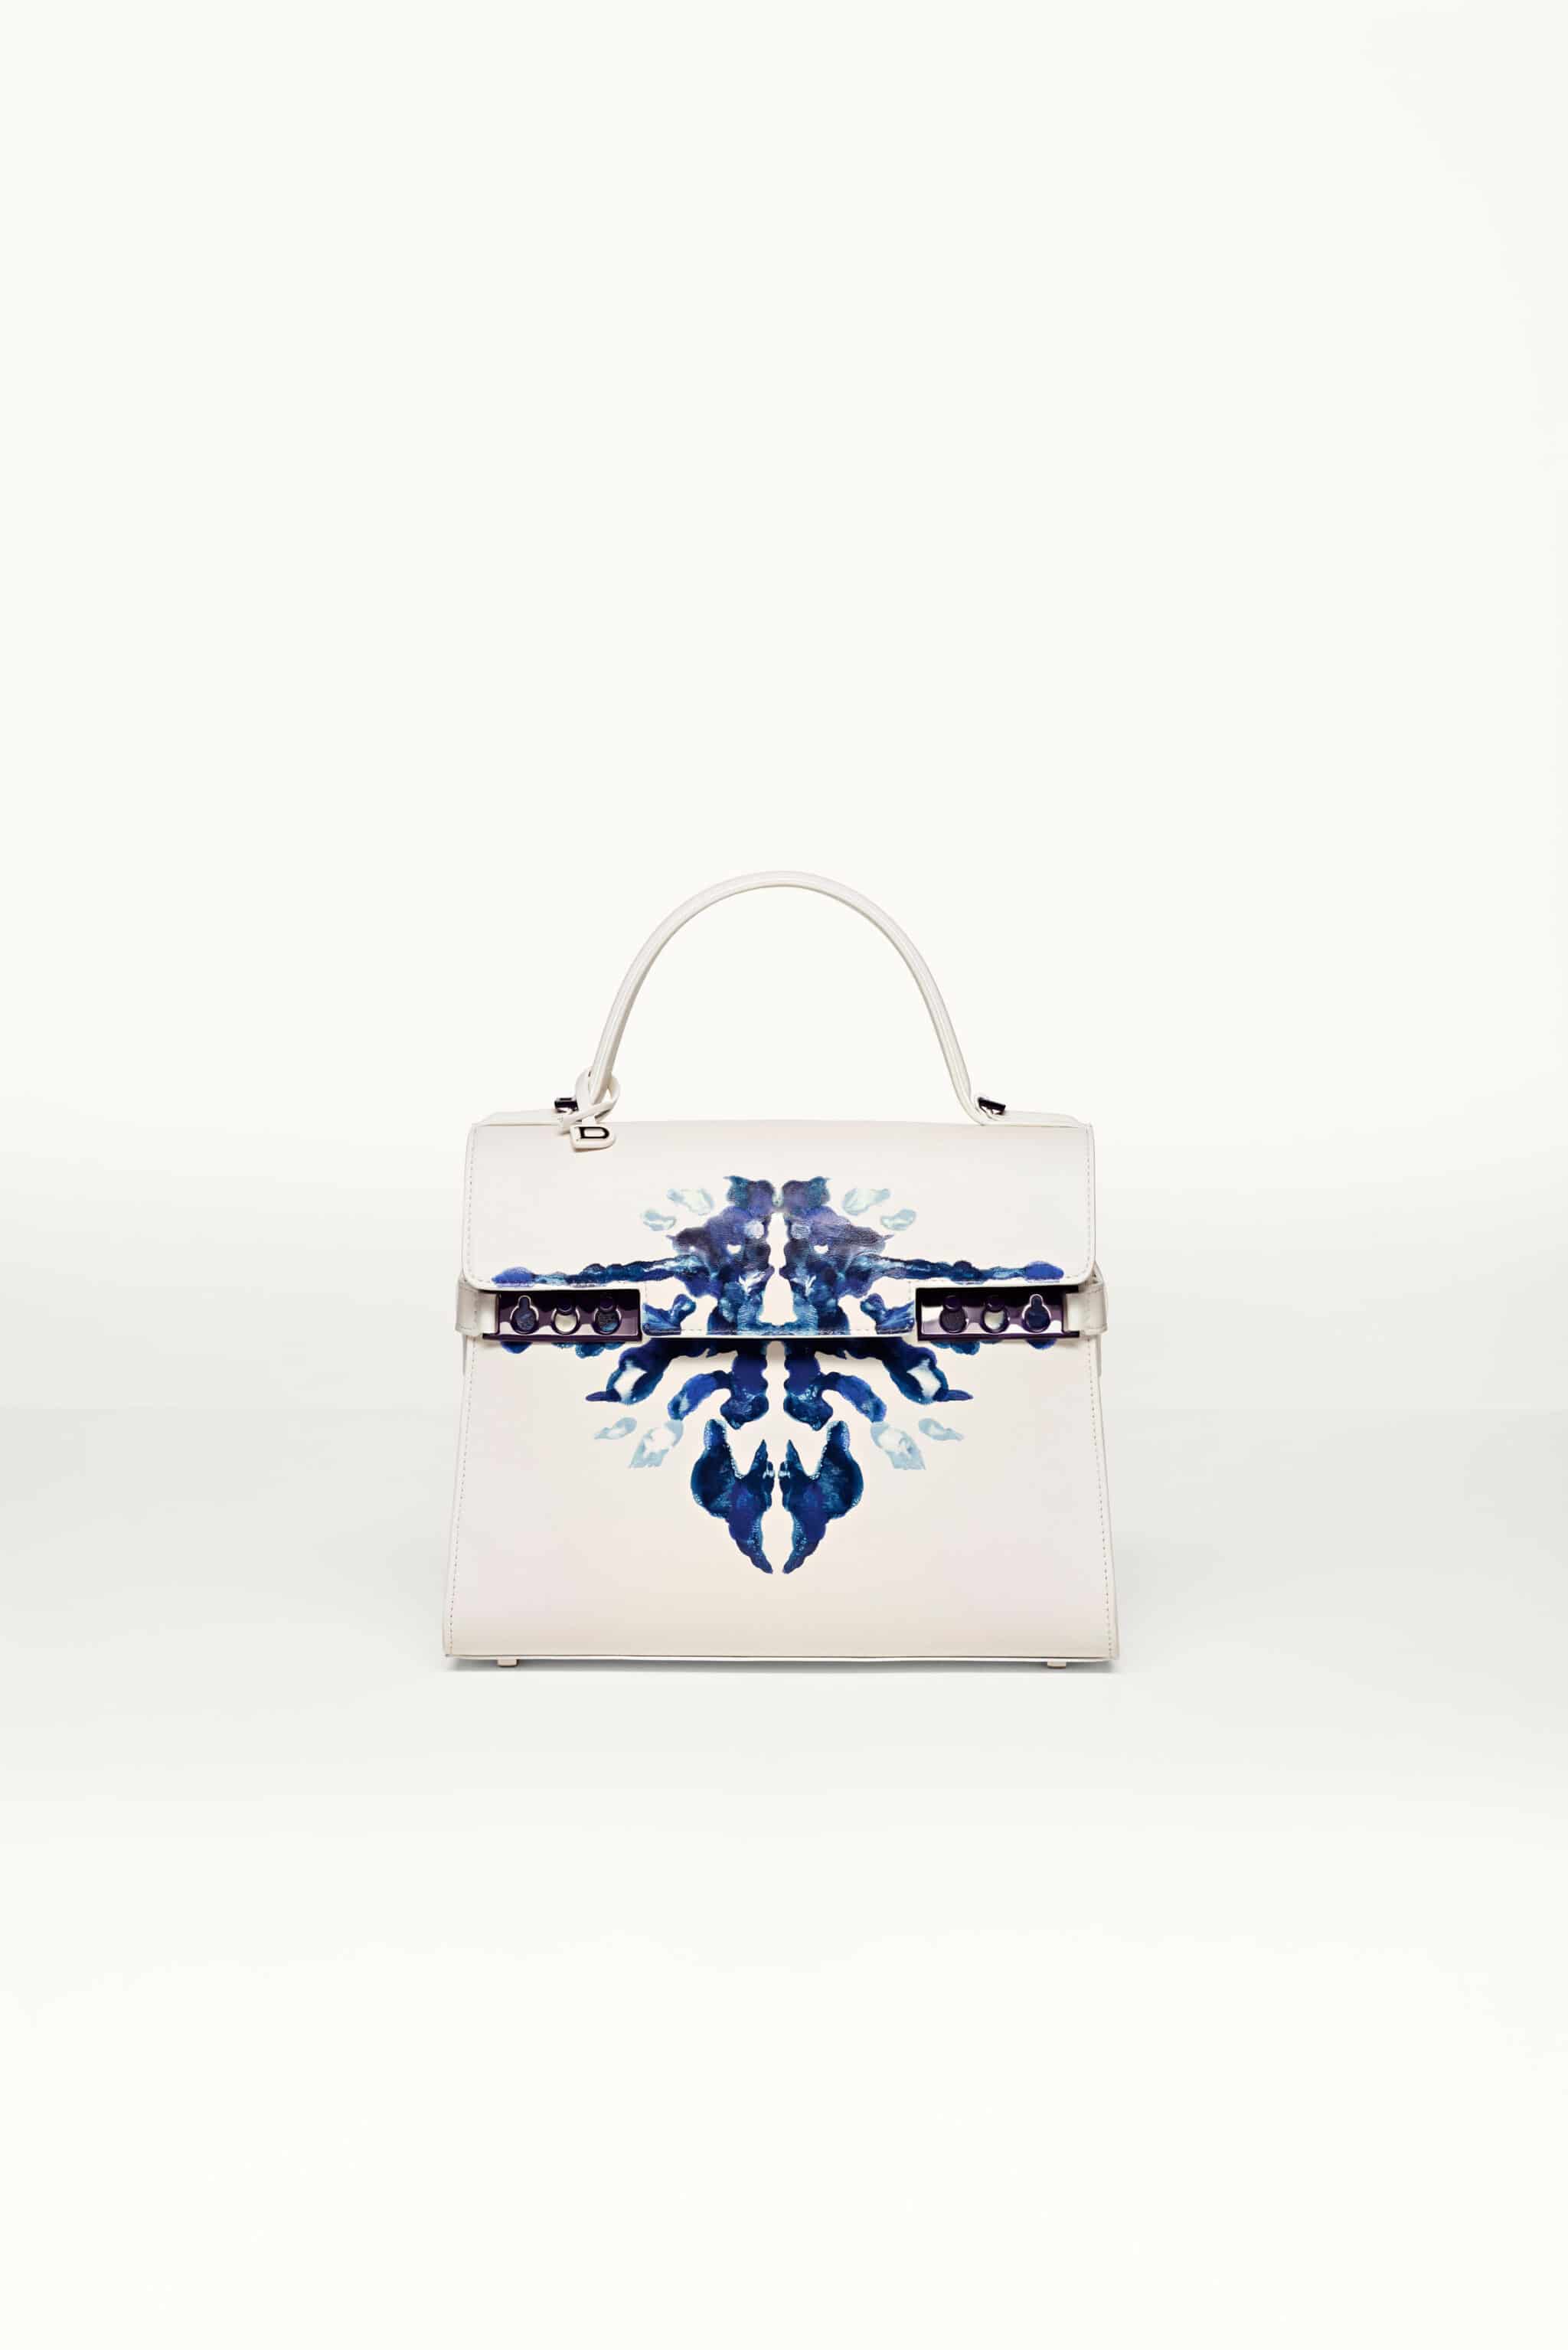 rare DELVAUX 2017 Limited Edition Tempete MM B Papillon lambskin